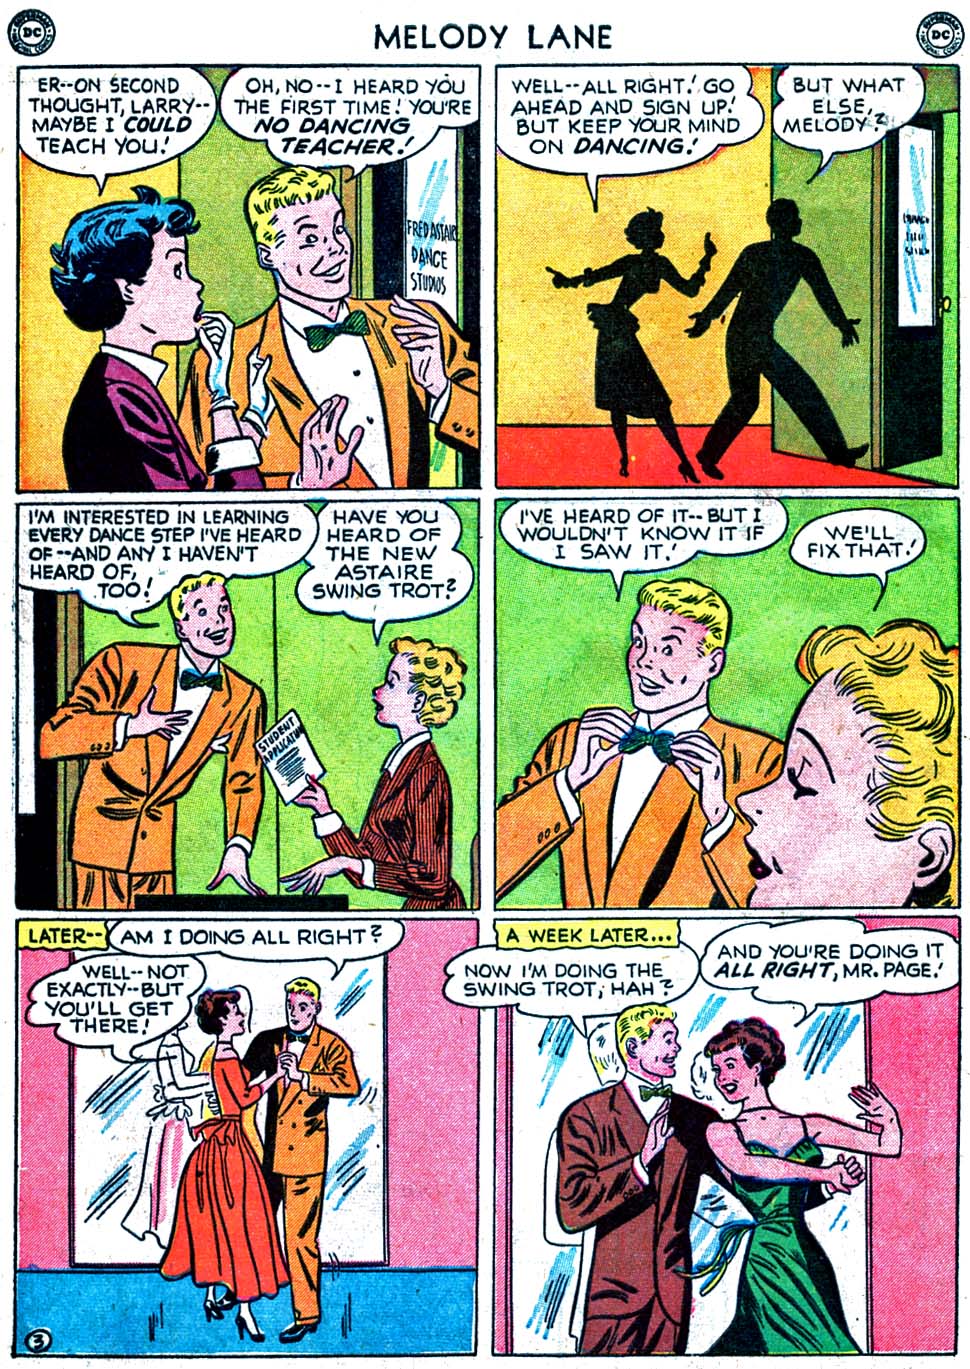 Read online Miss Melody Lane of Broadway comic -  Issue #2 - 44